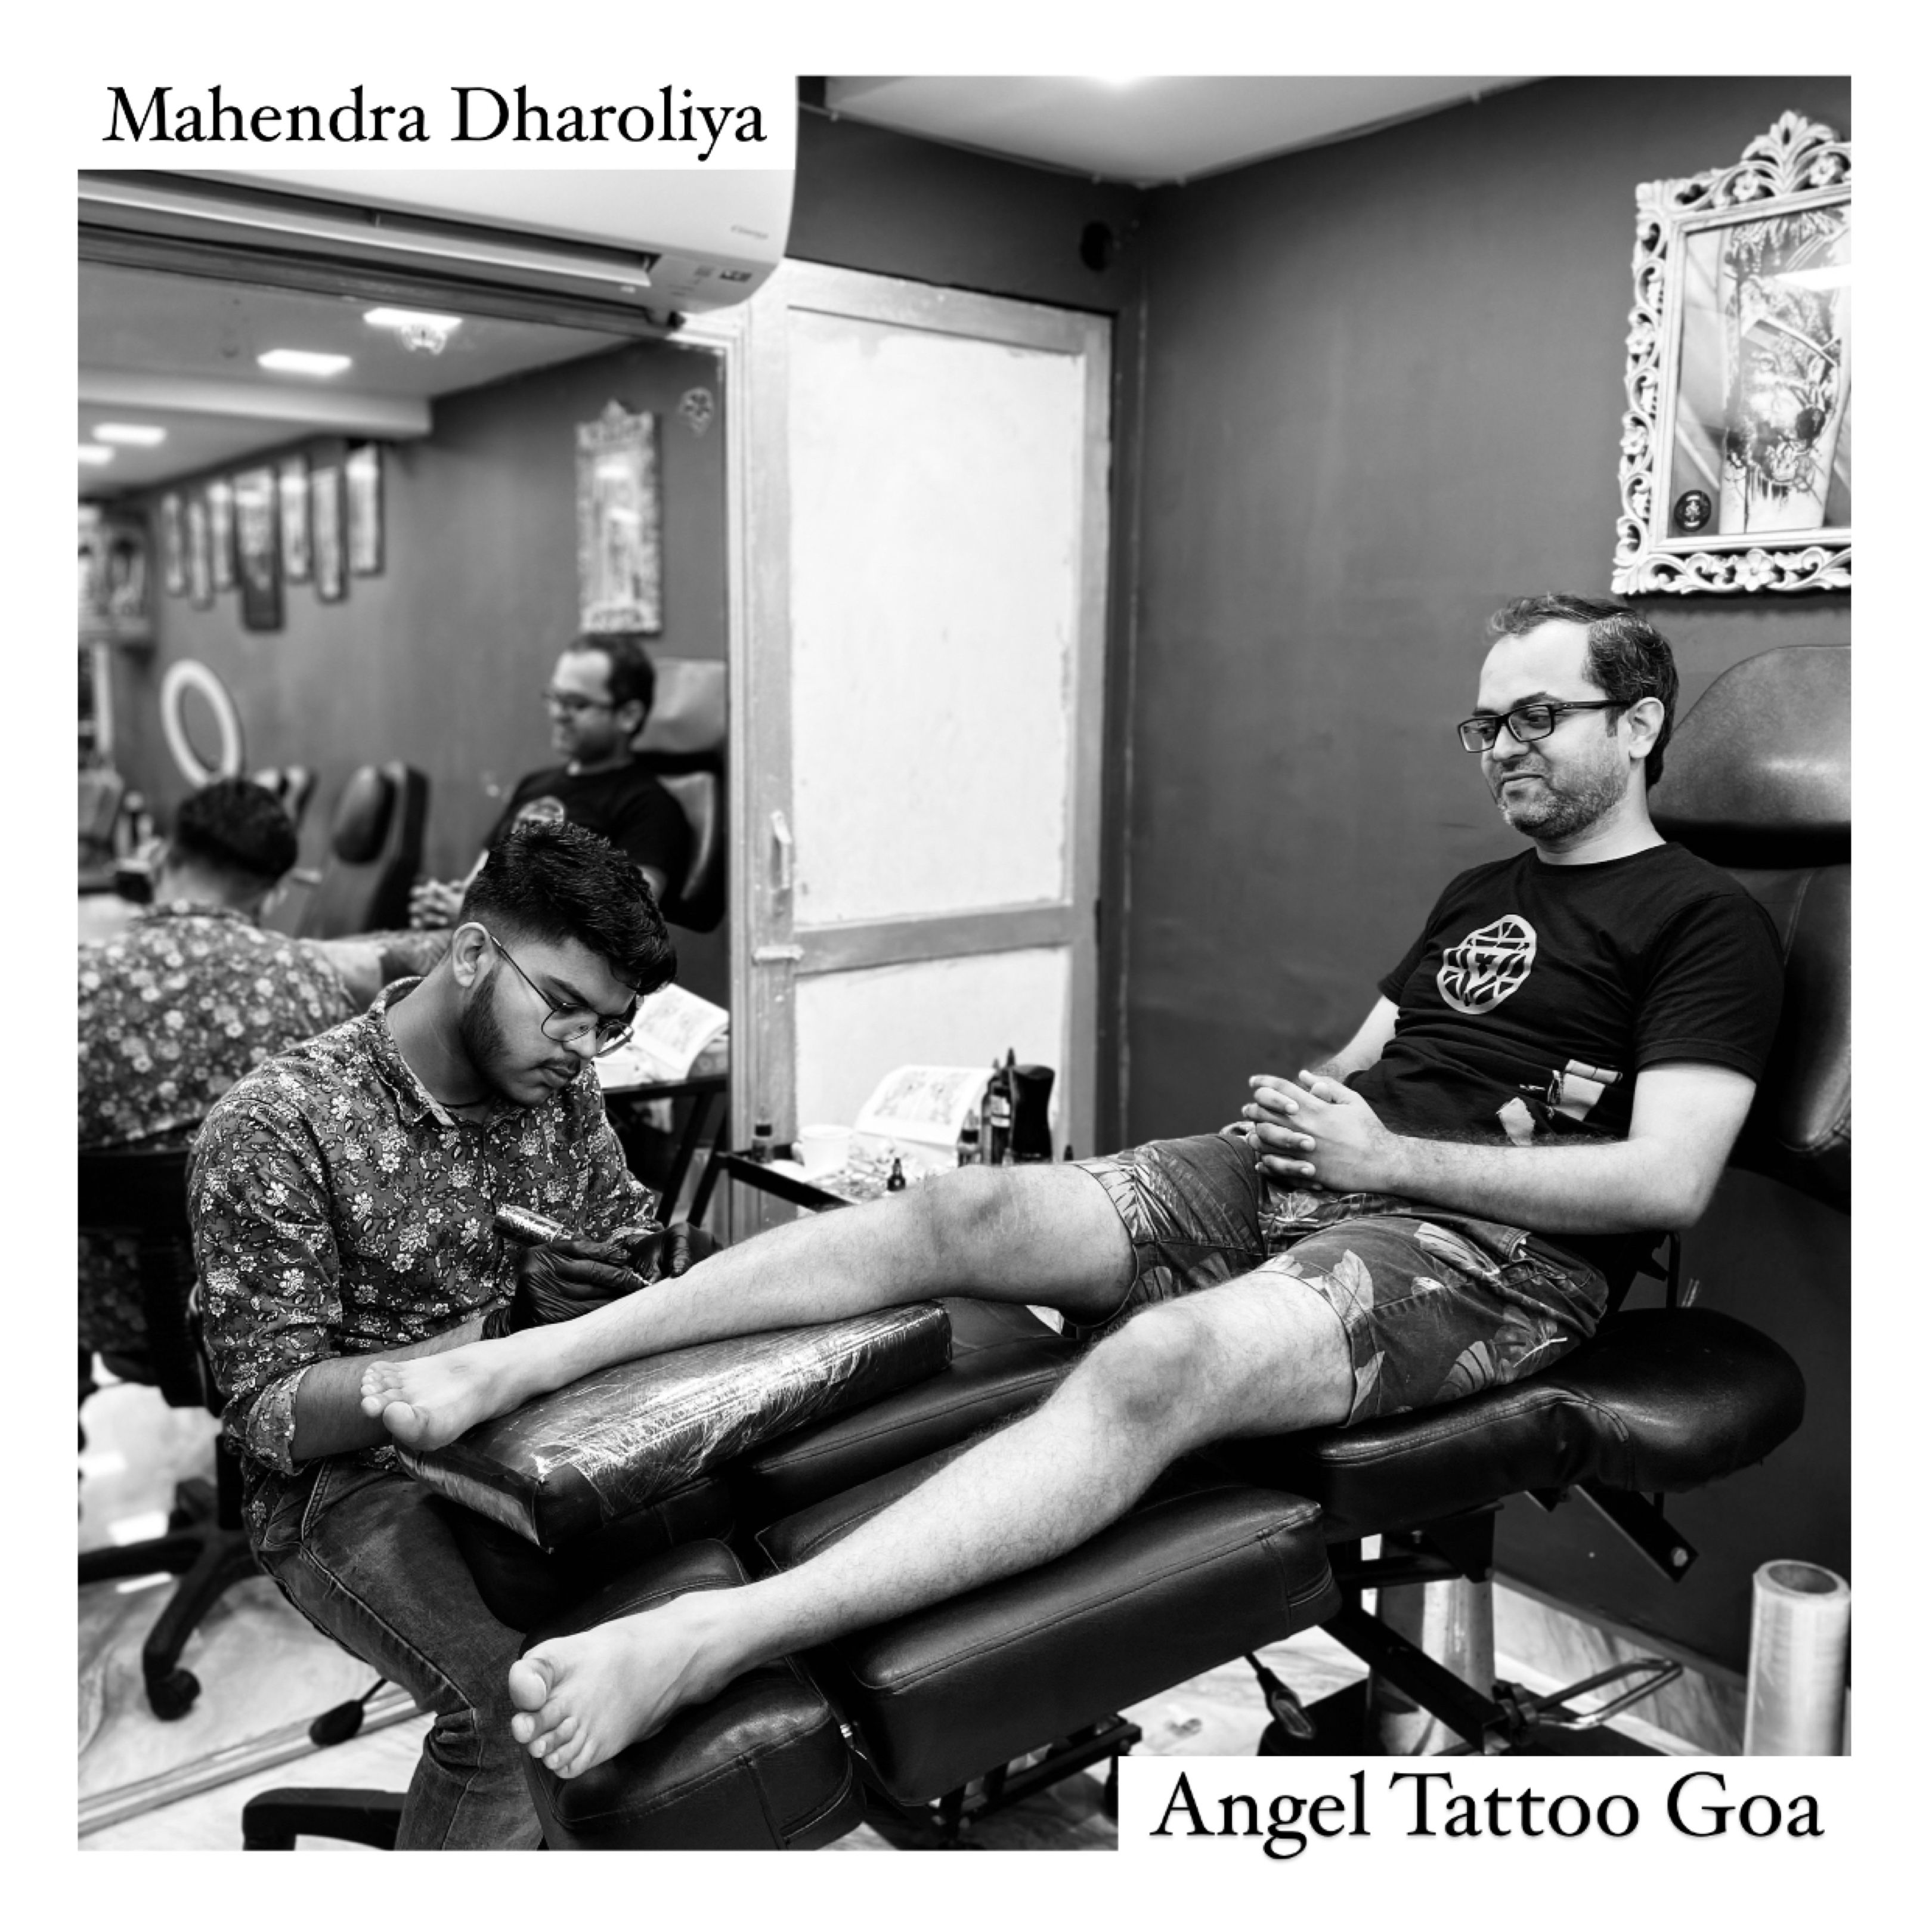 Goa Tattoo Archives - the goa official top 5 business and tourism blogger